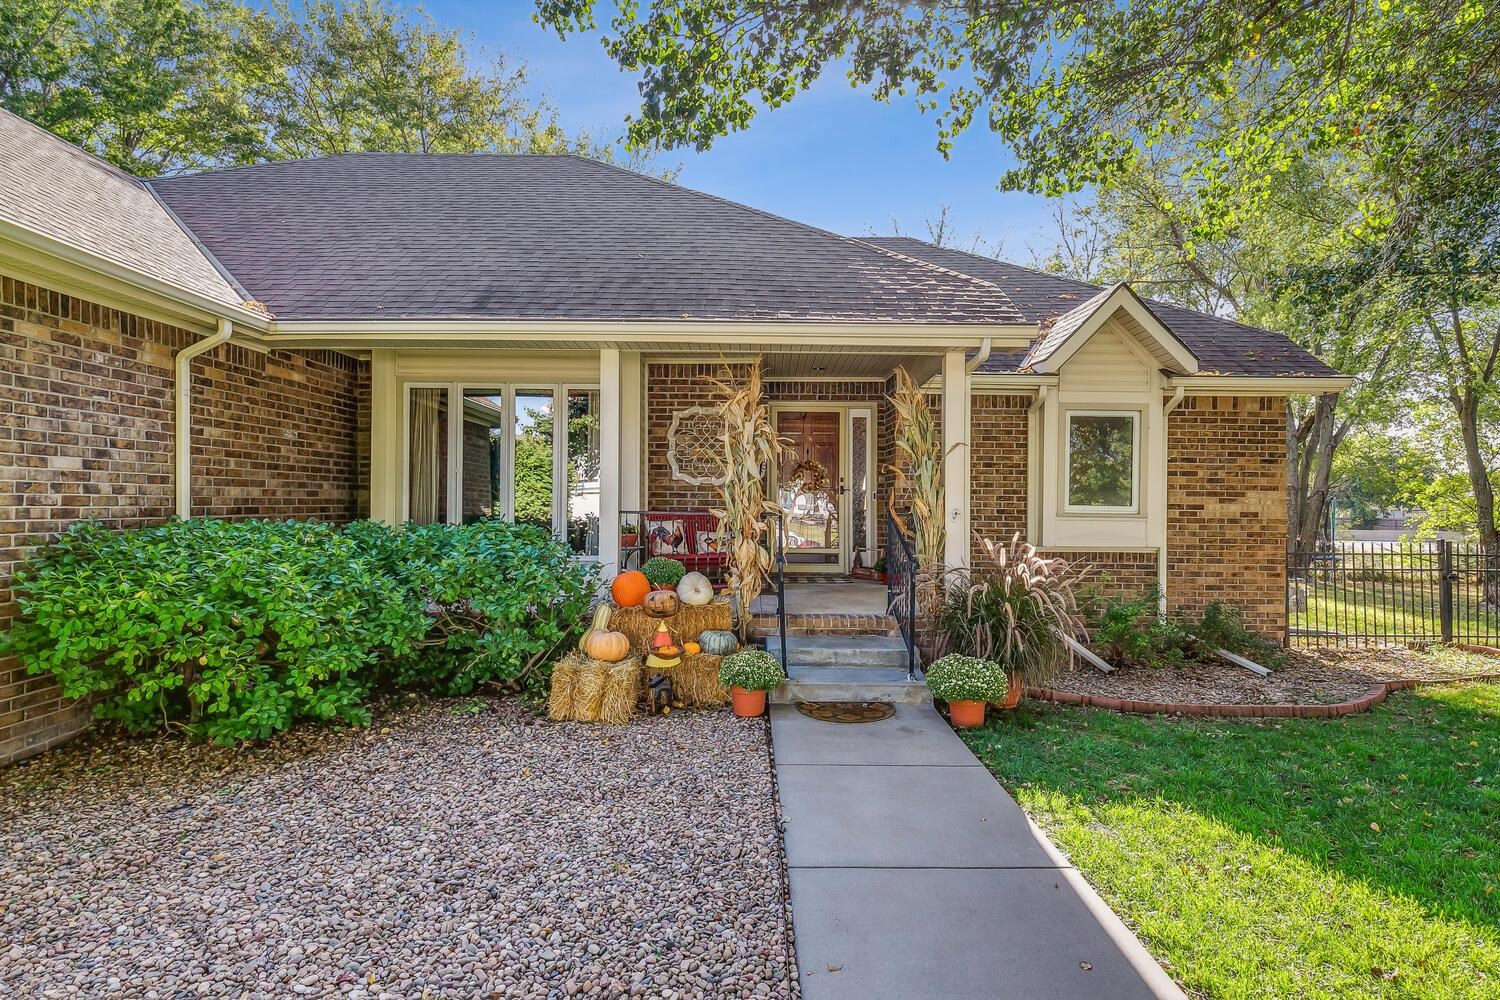 Welcome to this stunning home situated in one of the most desirable neighborhoods in East Wichita. T